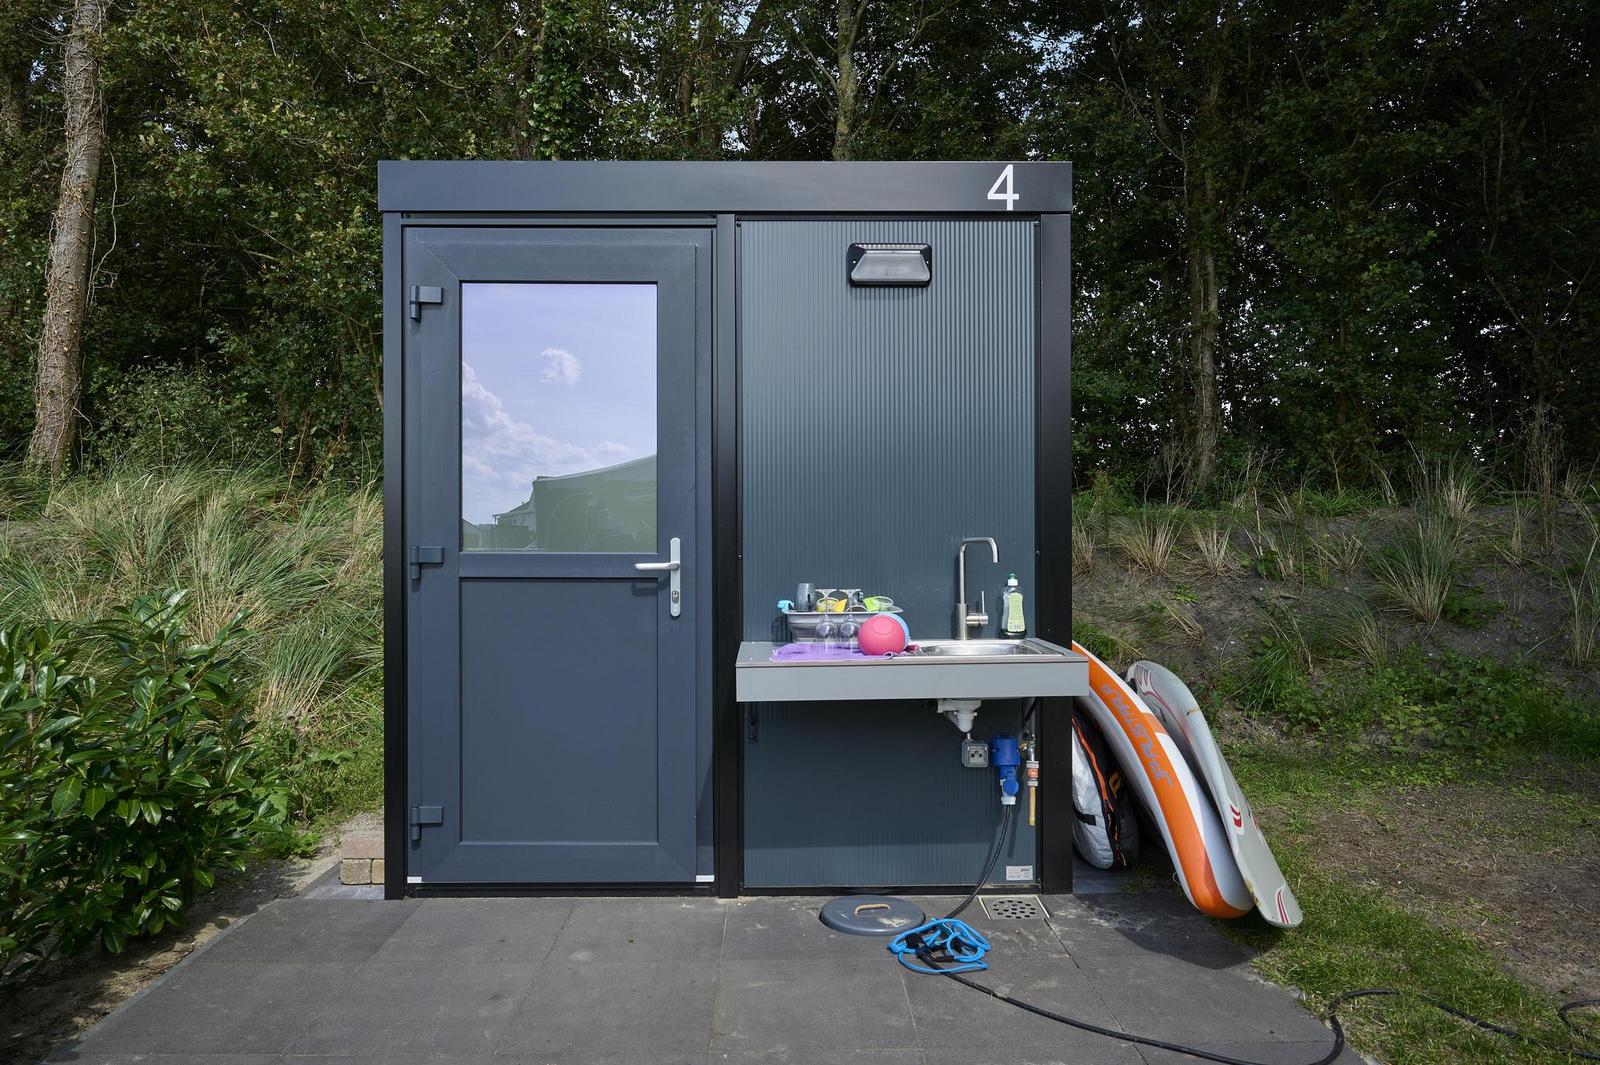 Comfort pitch with private sanitary facilities